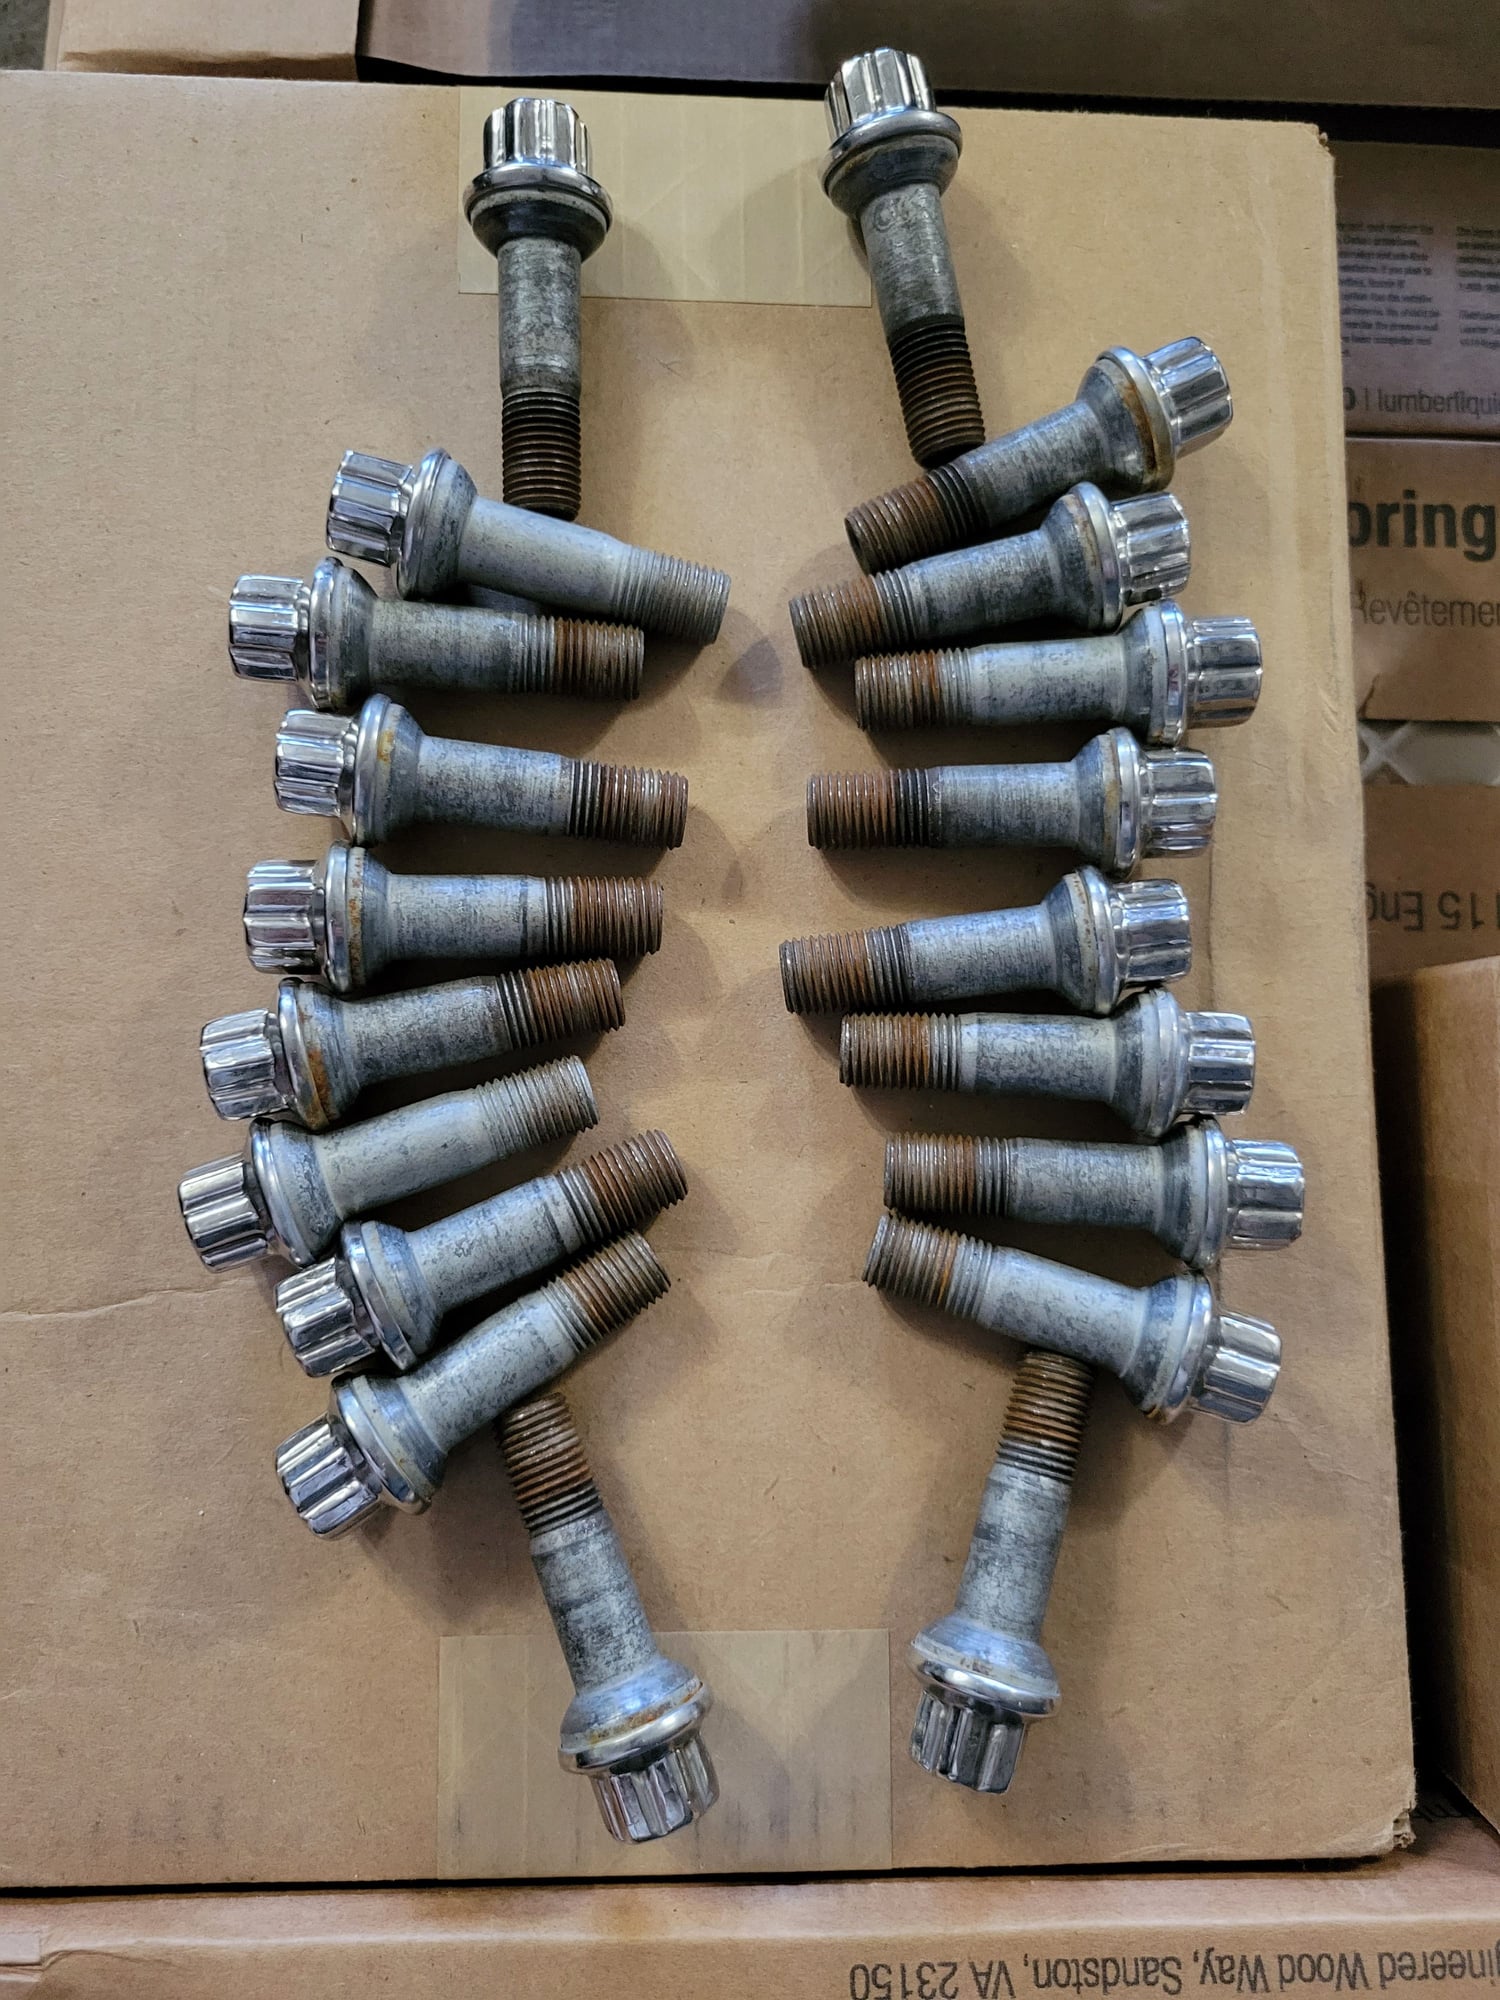 Wheels and Tires/Axles - 07-13 W221 MERCEDES S550 S600 S63 WHEEL LUG NUTS BOLTS 000-990-54-07 - Used - All Years Mercedes-Benz All Models - Waterbury, CT 06708, United States